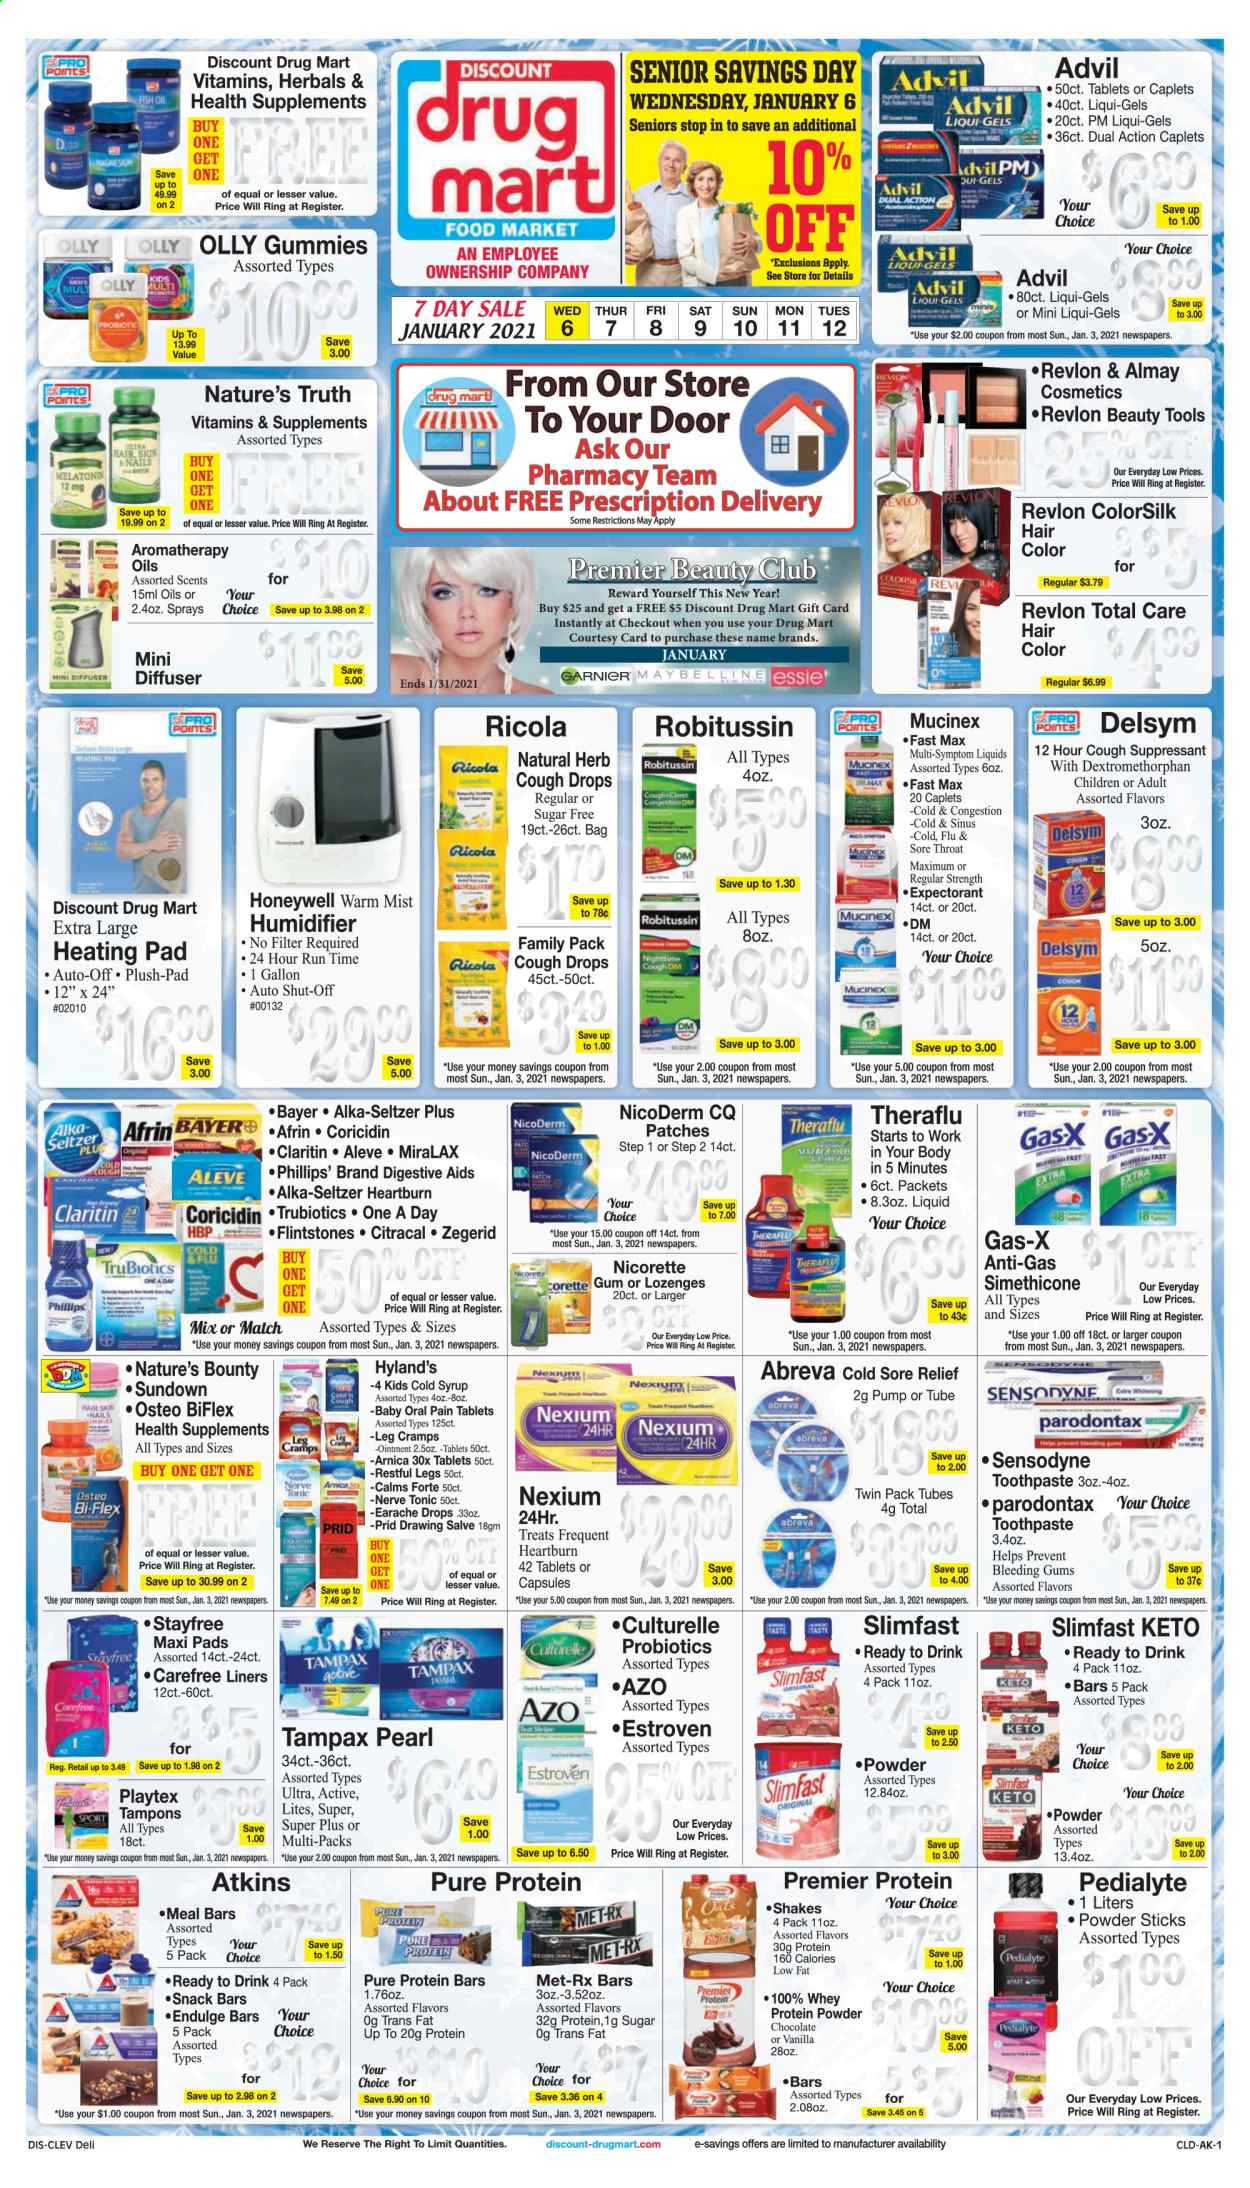 thumbnail - Discount Drug Mart Flyer - 01/06/2021 - 01/12/2021 - Sales products - Slimfast, shake, ricola, chocolate, Bounty, Digestive, snack bar, snack, powder chocolate, protein bar, herbs, fish oil, syrup, tonic, 7UP, seltzer water, ointment, toothpaste, Sensodyne, Stayfree, Tampax, Playtex, sanitary pads, Carefree, tampons, Abreva, Almay, Revlon, hair color, pan, diffuser, aromatherapy oils, heating pad, Honeywell, humidifier, Afrin, Aleve, Coricidin, Culturelle, Delsym, Cold & Flu, MiraLAX, Mucinex, Nature's Bounty, Nature's Truth, NicoDerm, Nicorette, Robitussin, Theraflu, probiotics, Osteo bi-flex, Nexium, Bi-Flex, Advil Rapid, Alka-seltzer, whey protein, cough drops, Bayer, health supplement. Page 1.